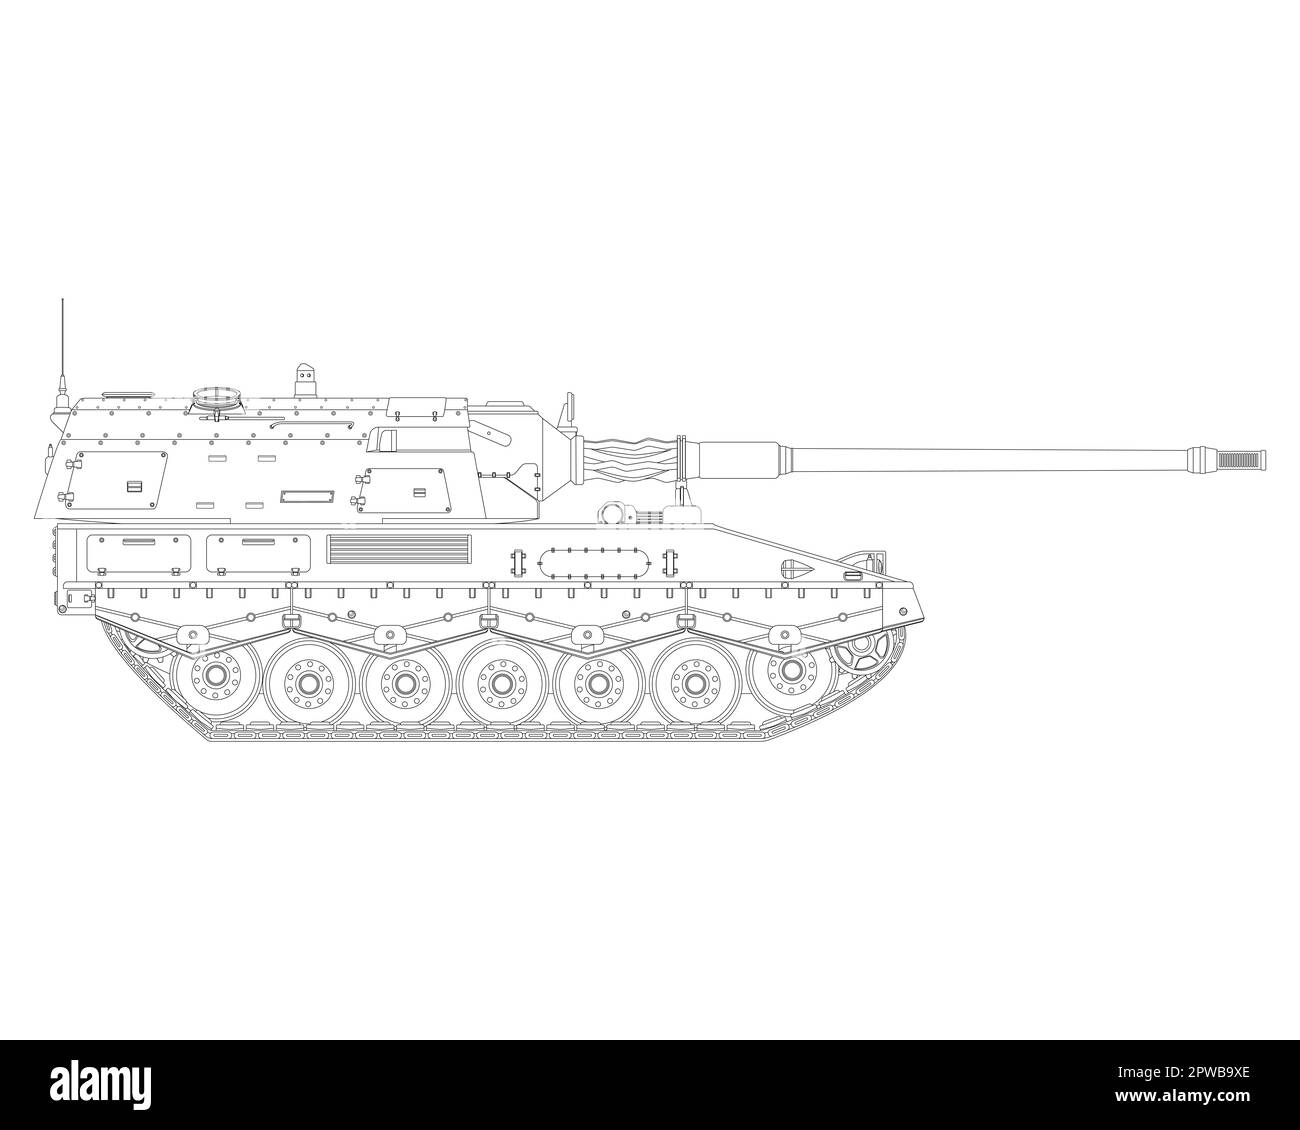 Self-propelled howitzer in line art. German 155 mm Panzerhaubitze 2000. Military armored vehicle. Detailed illustration isolated on white background. Stock Photo